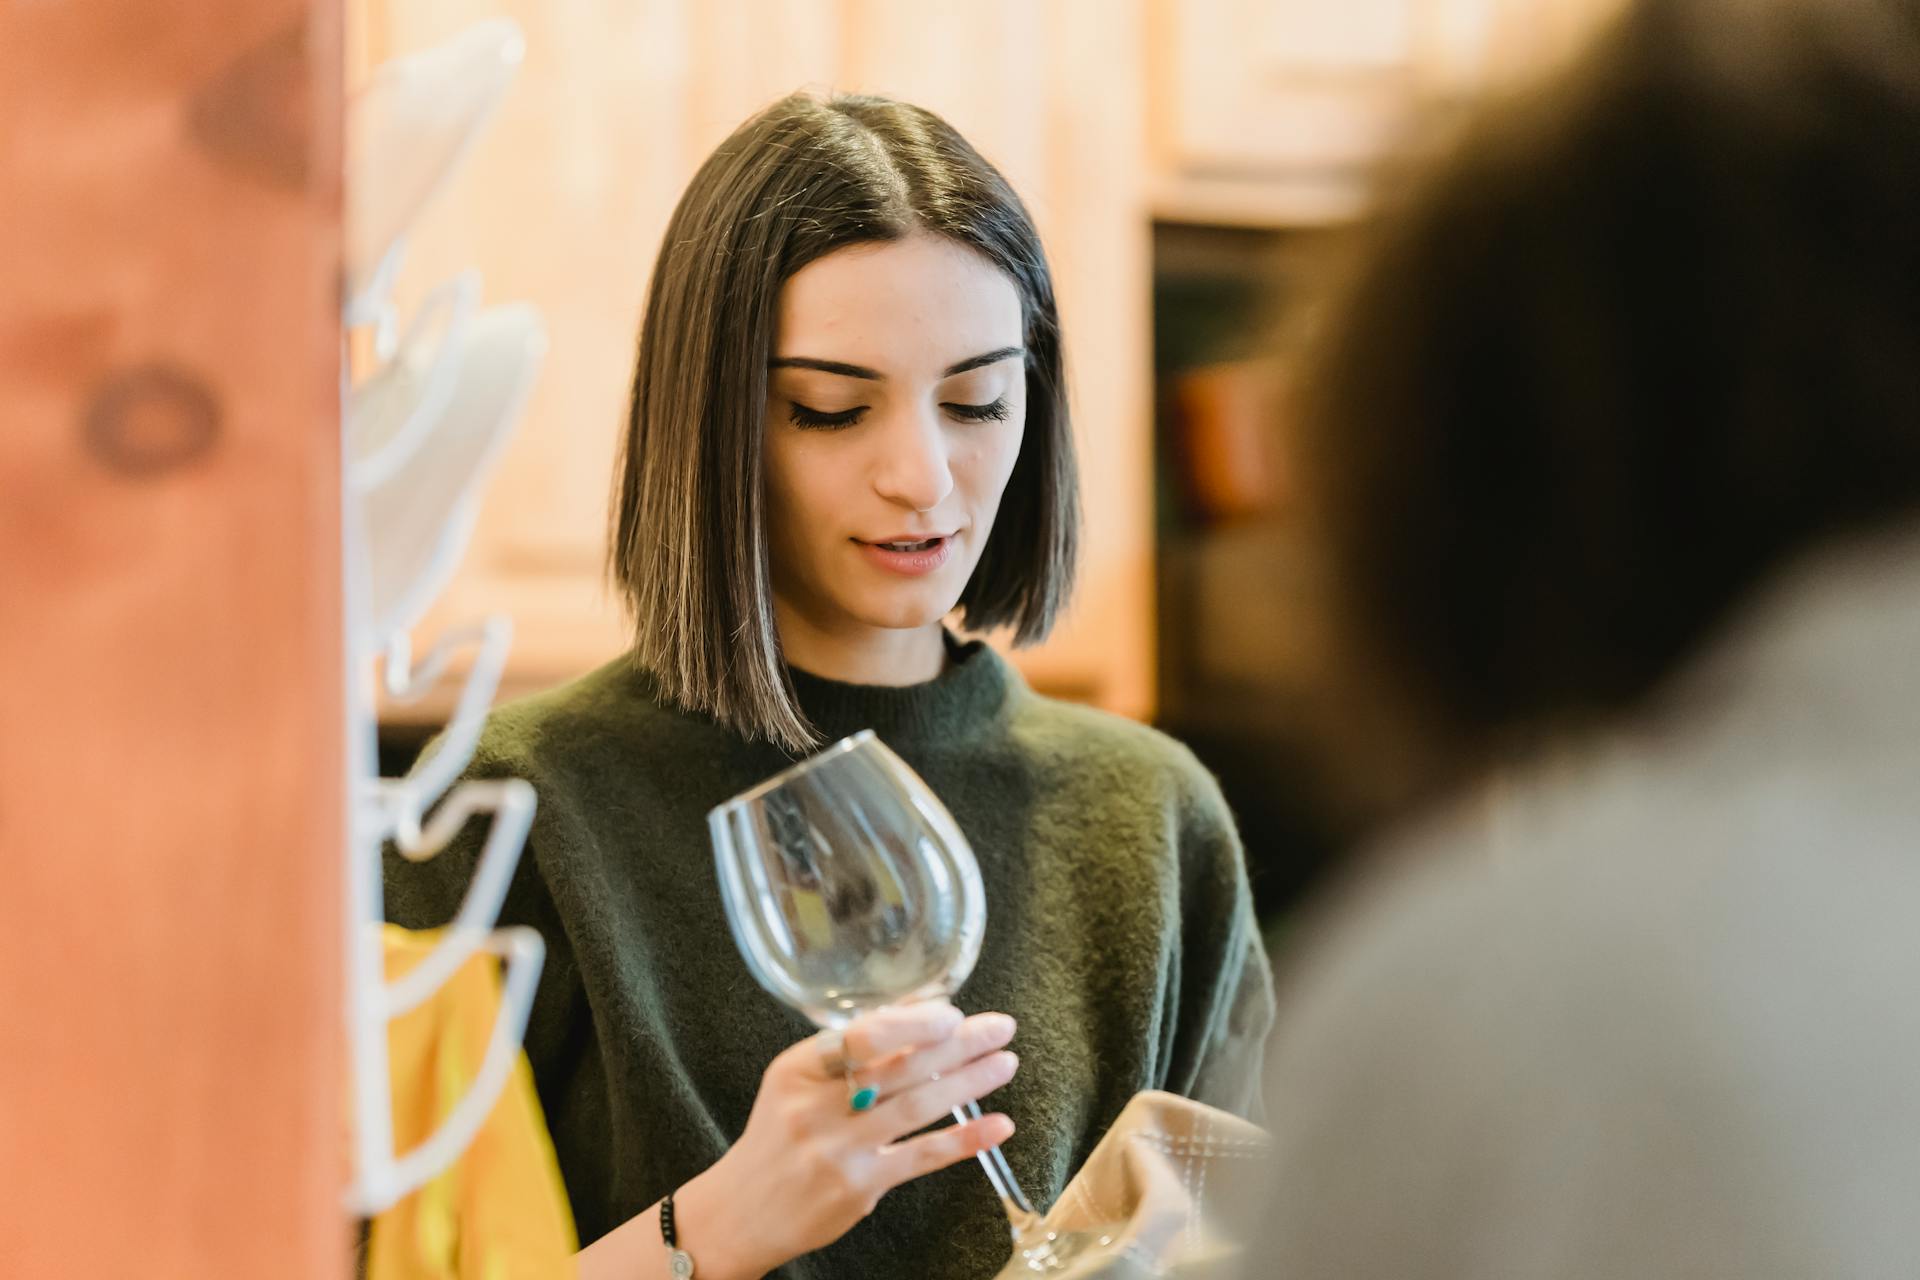 A woman holding a glass | Source: Pexels